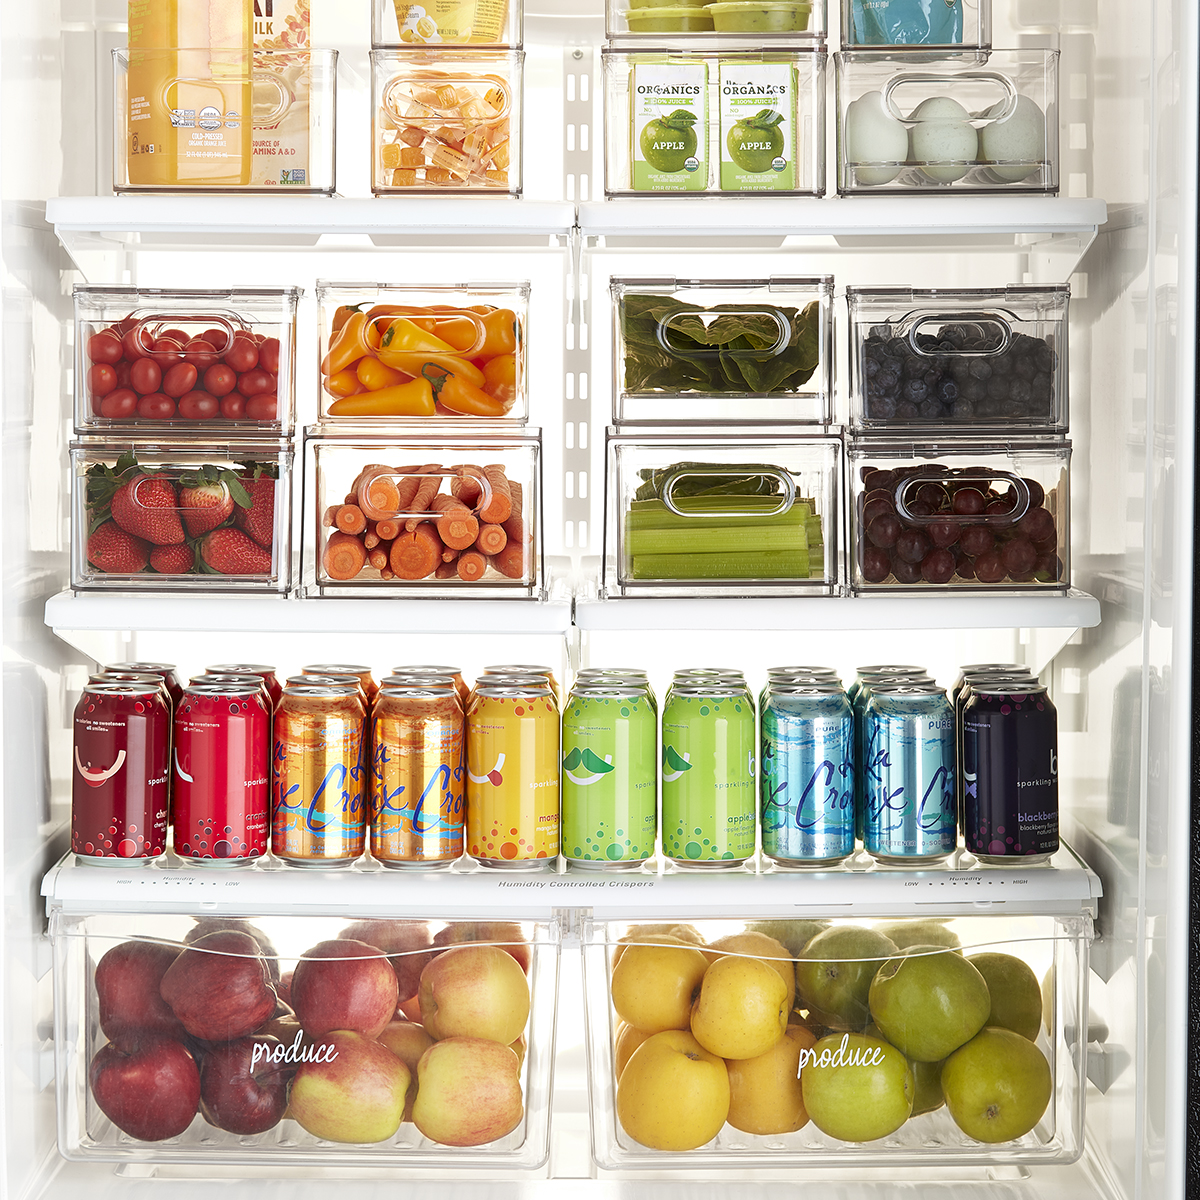 https://www.containerstore.com/catalogimages/389177/SU_20_THE-Inside-Fridge_RGB.jpg